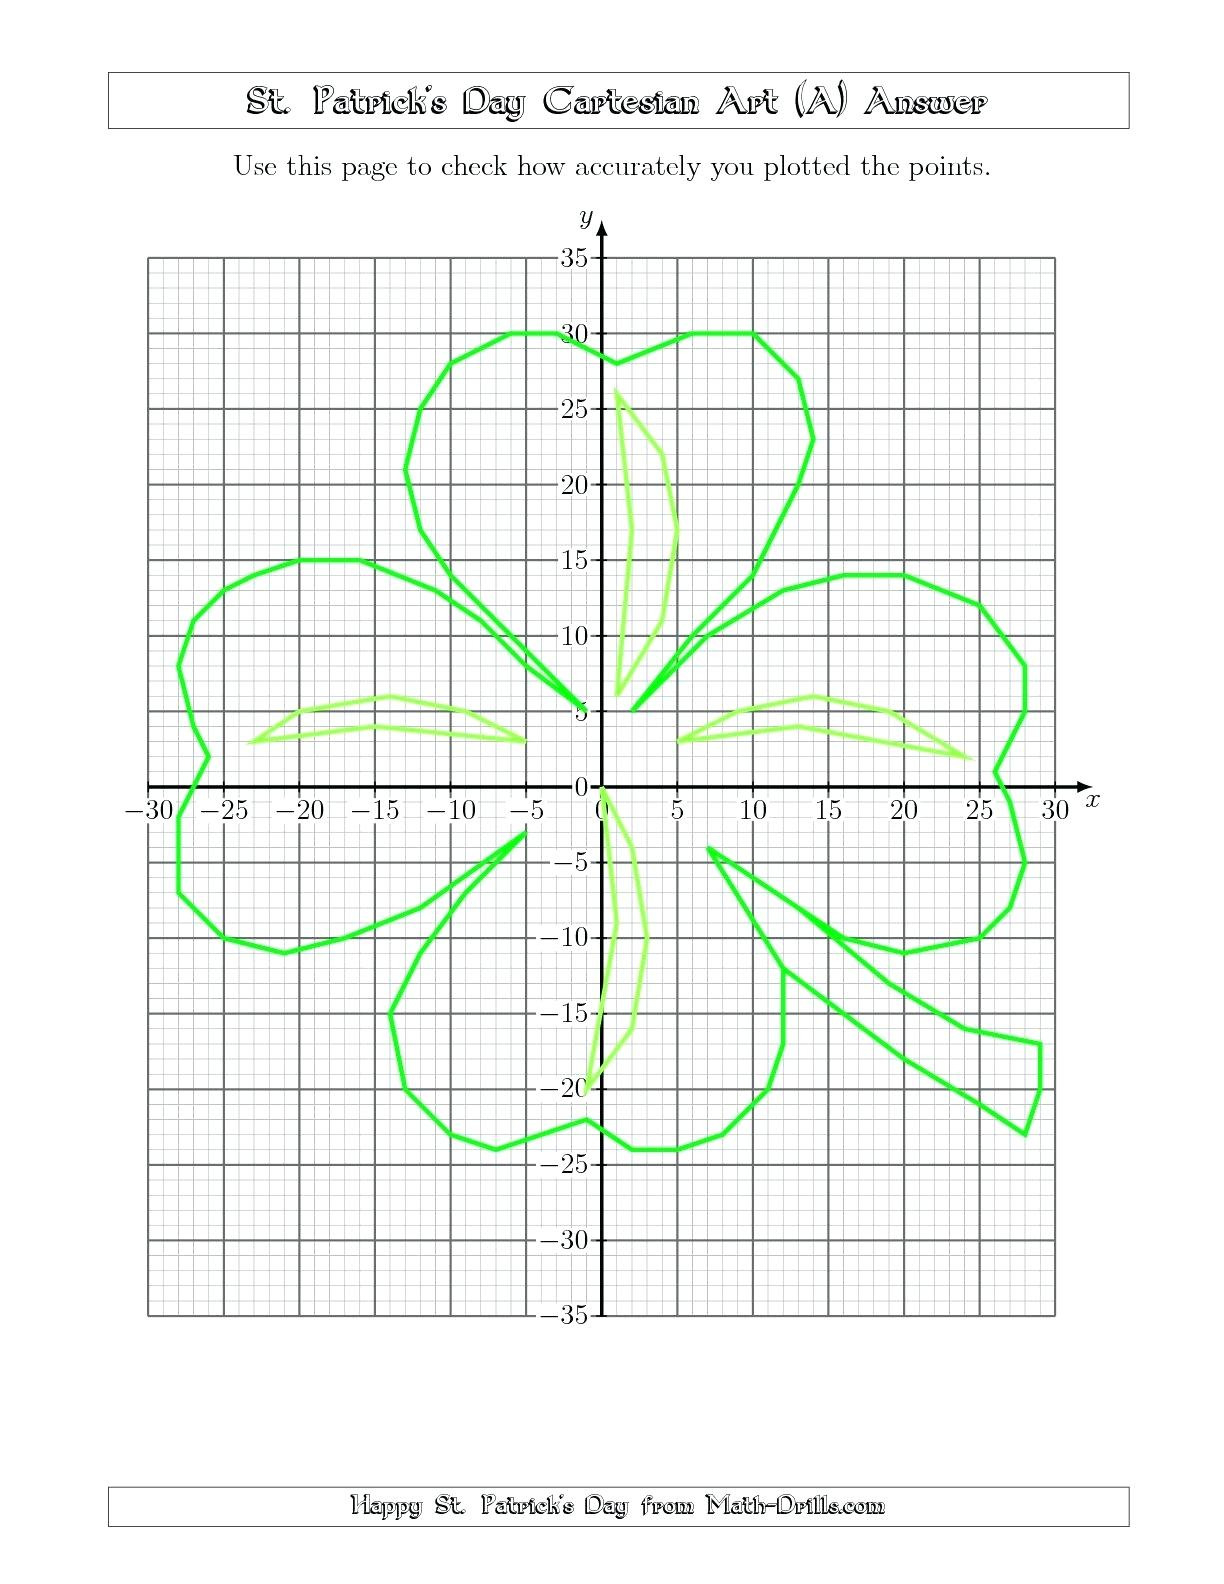 graph points on a coordinate plane